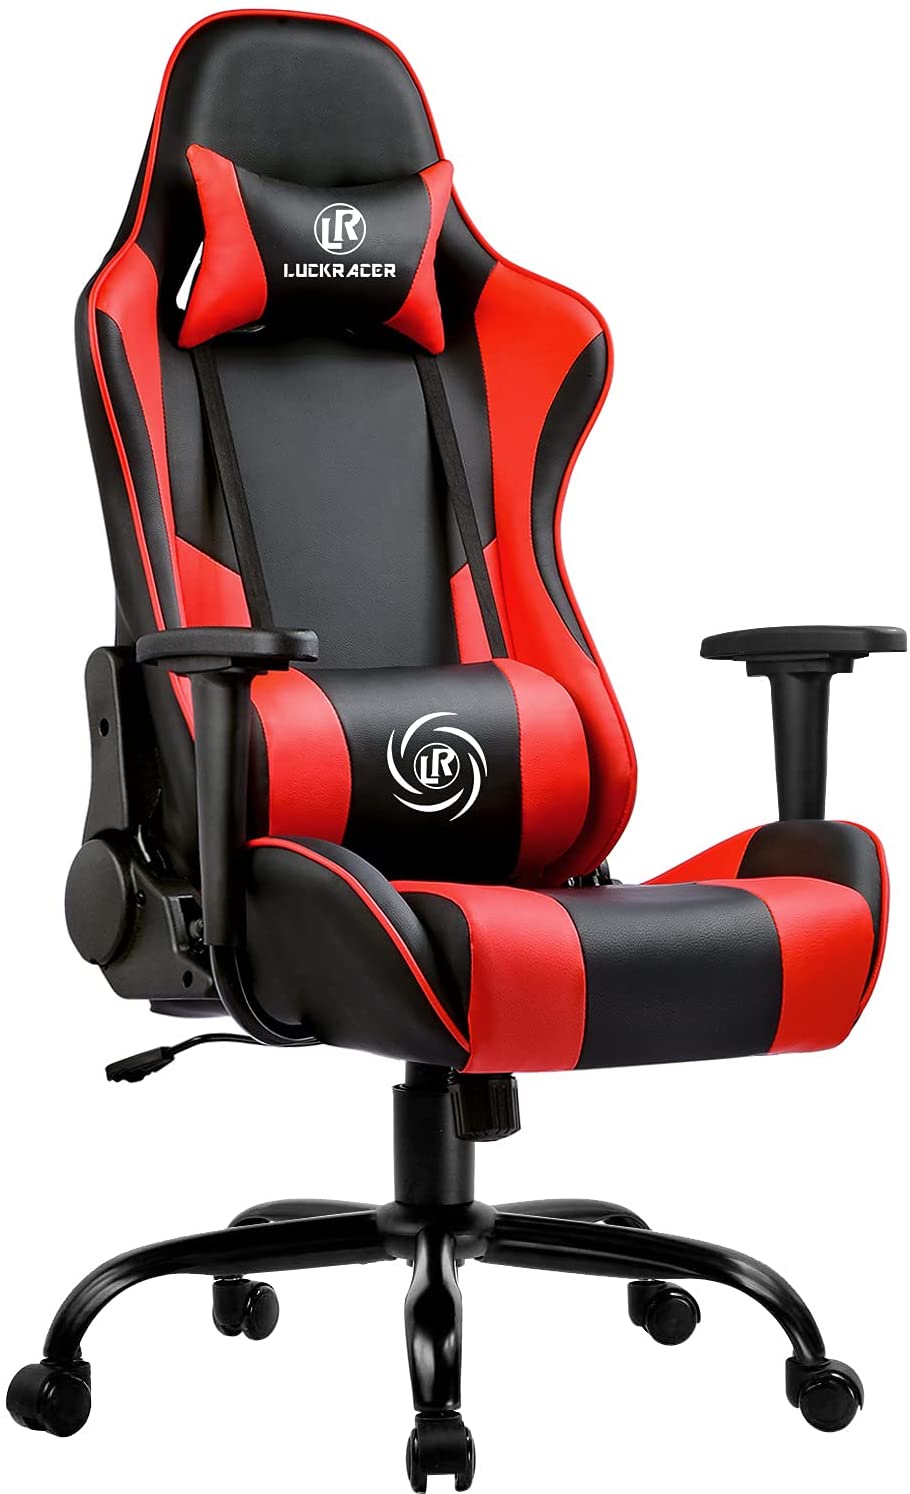  LUCKRACER Gaming Chair